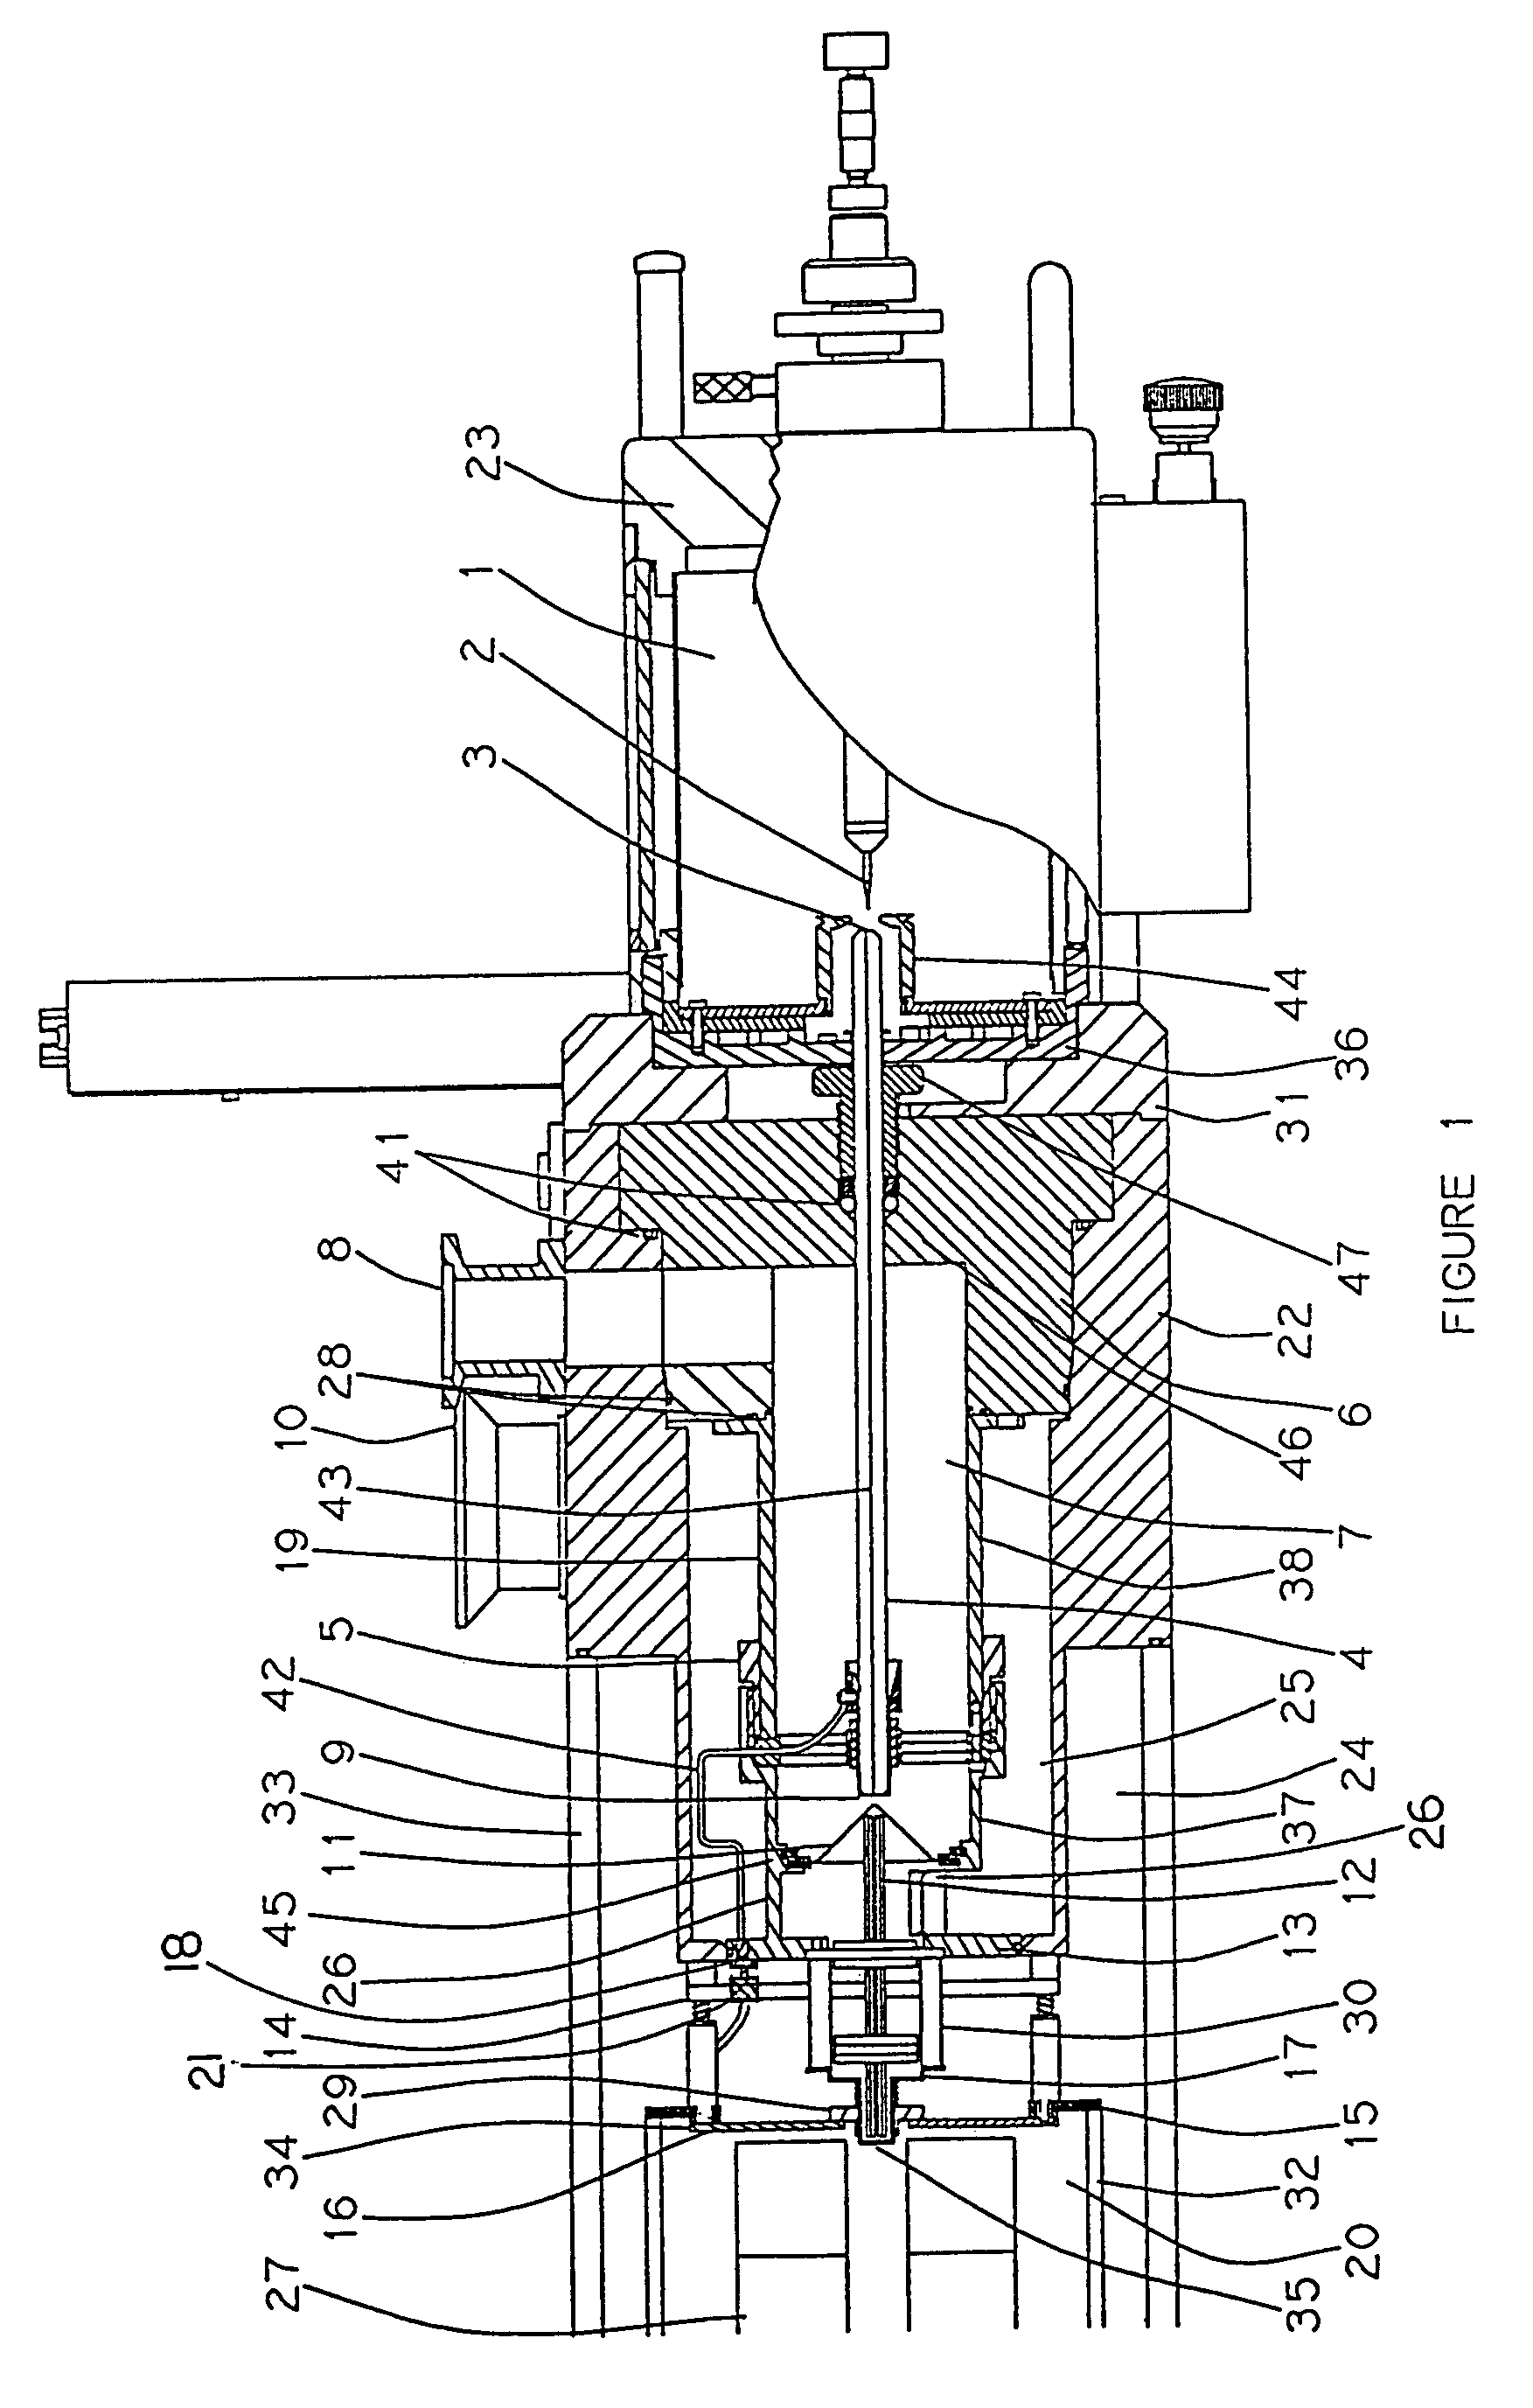 Configuration of an atmospheric pressure ion source